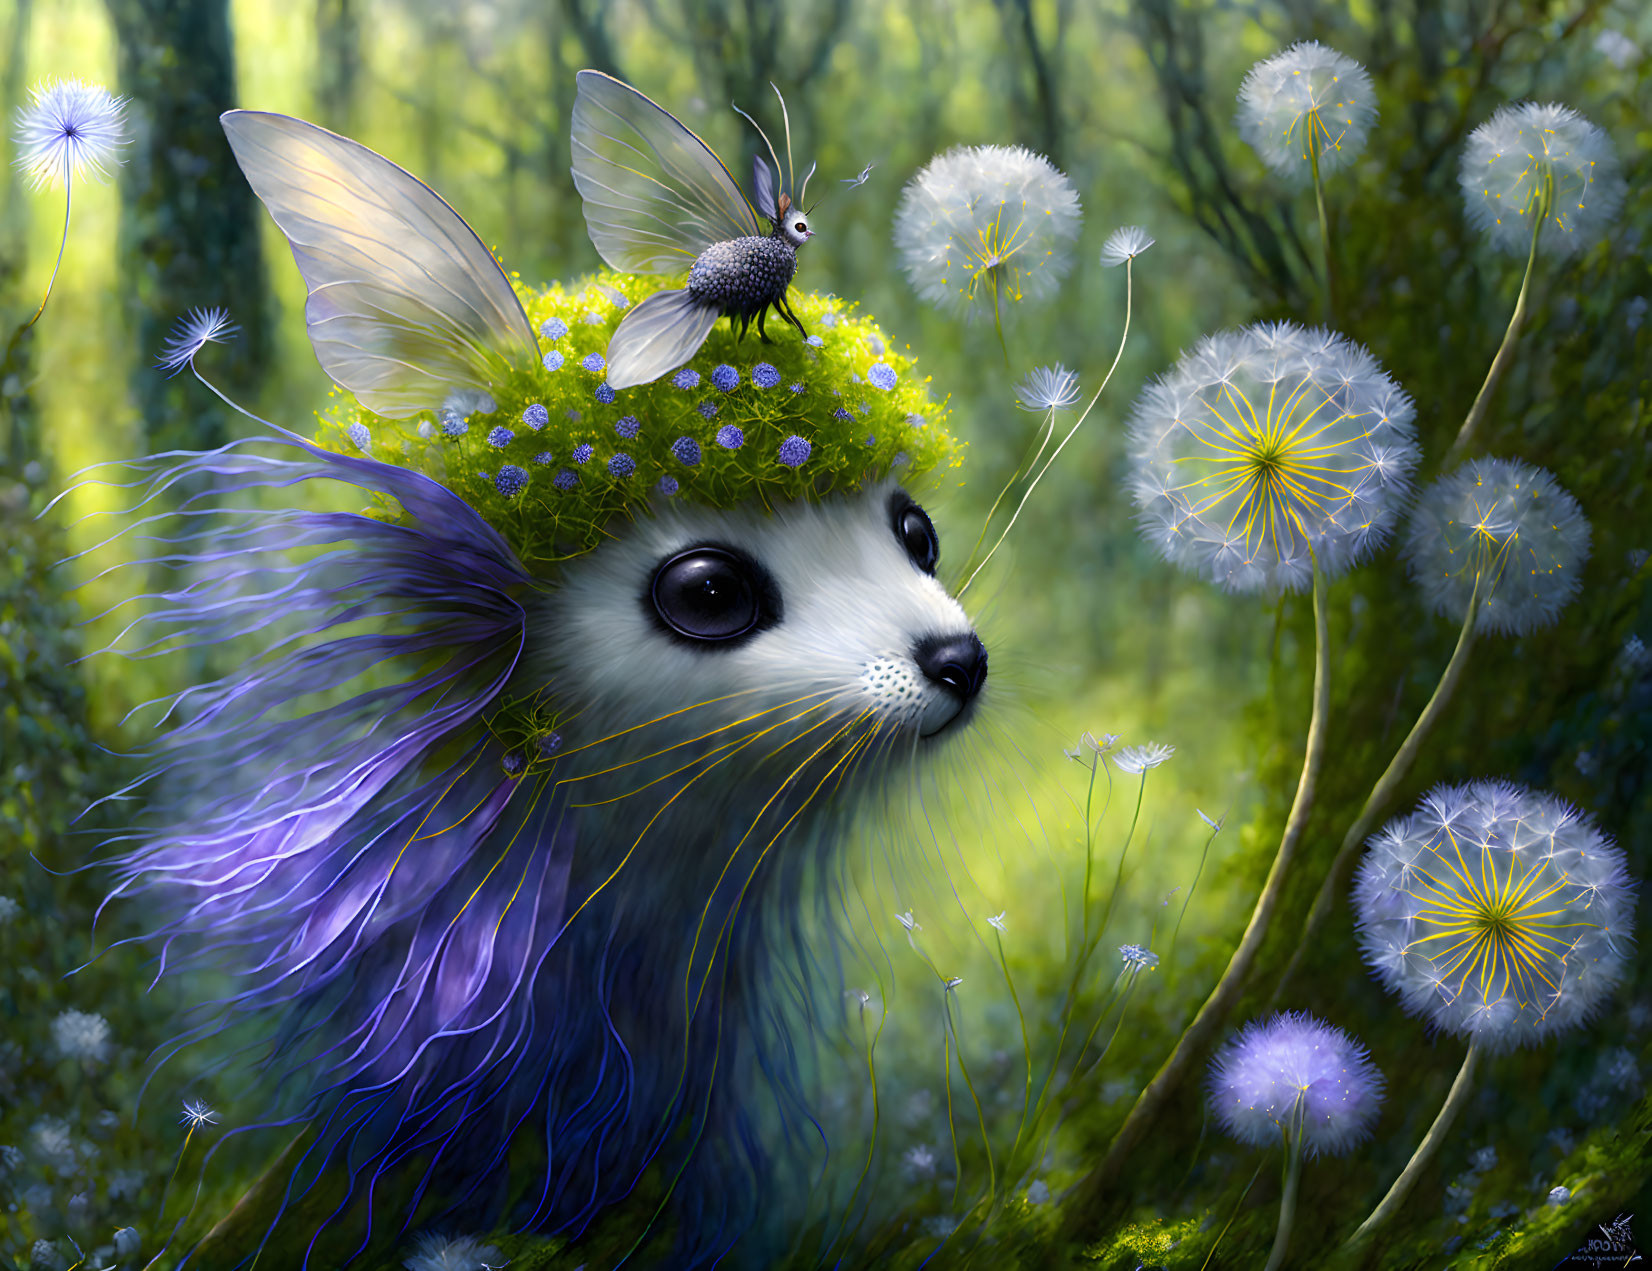 Blue-furred rabbit-headed creature with wings in lush forest